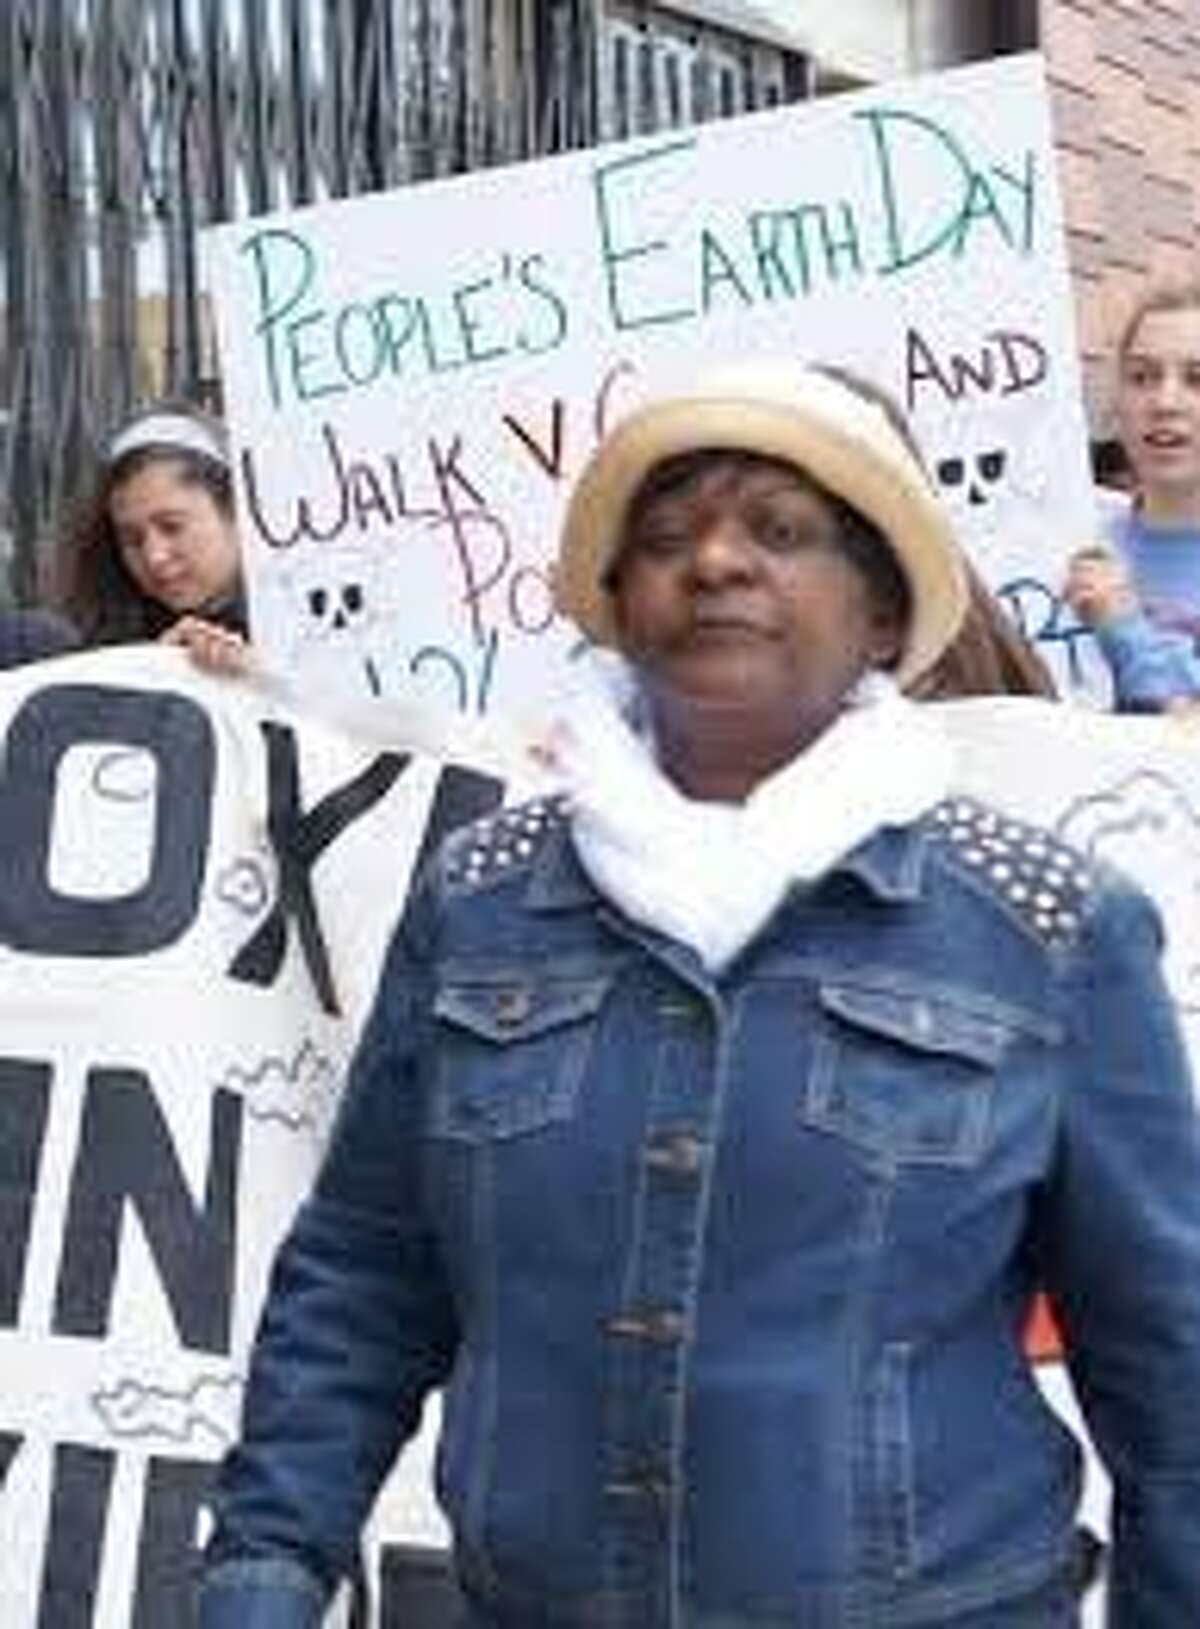 Environmental activist Marie Harrison was no stranger to protests and picket signs